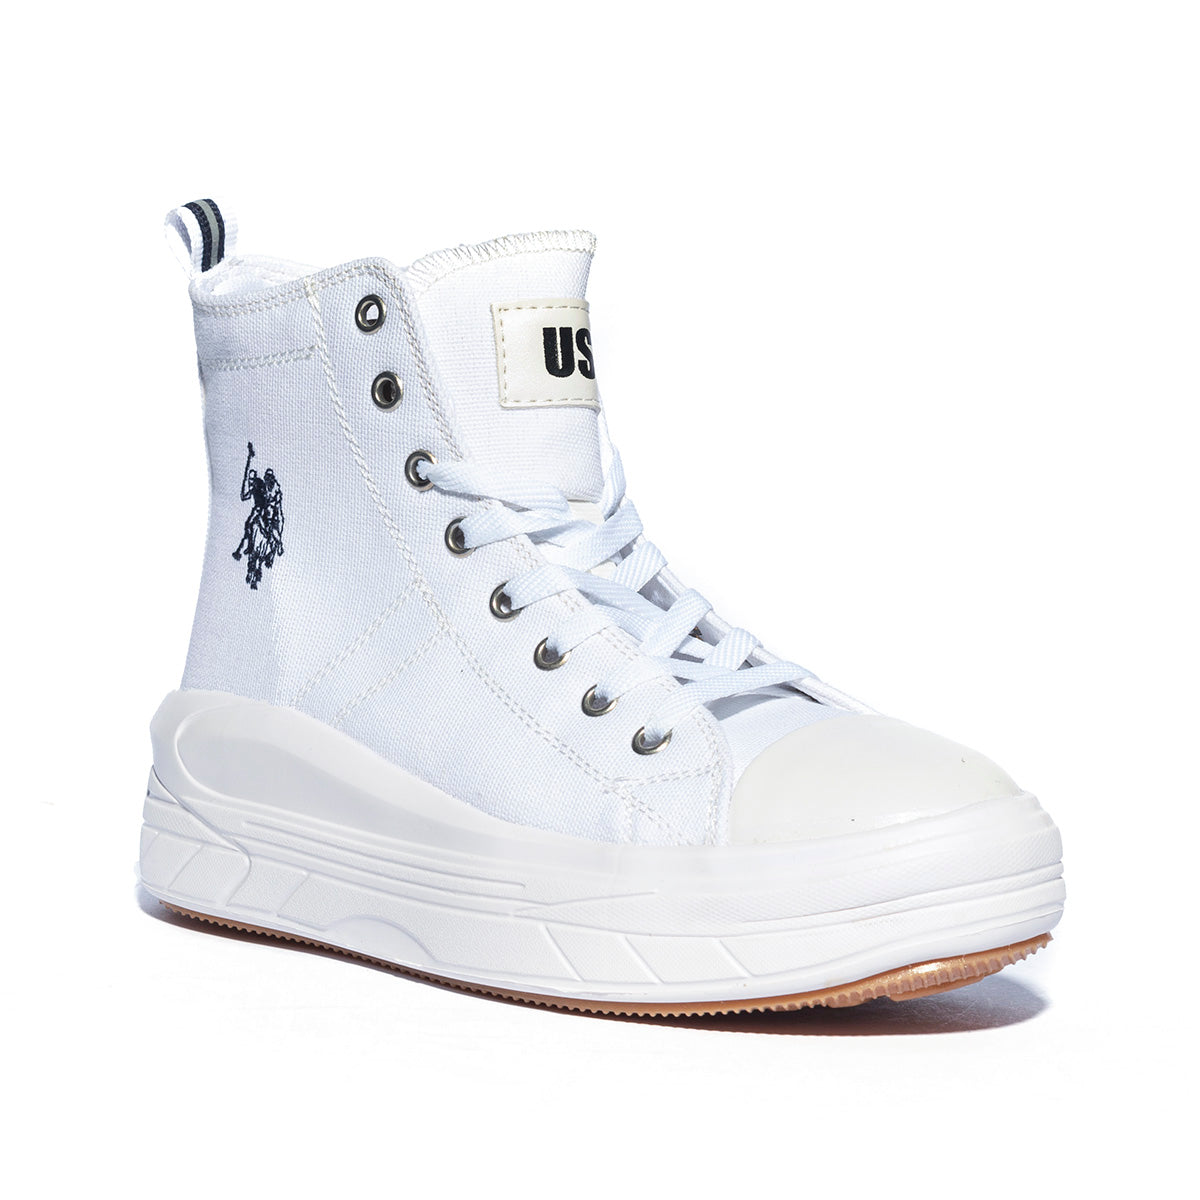 Sneakers U.S. Polo Assn. Clementine Bianche